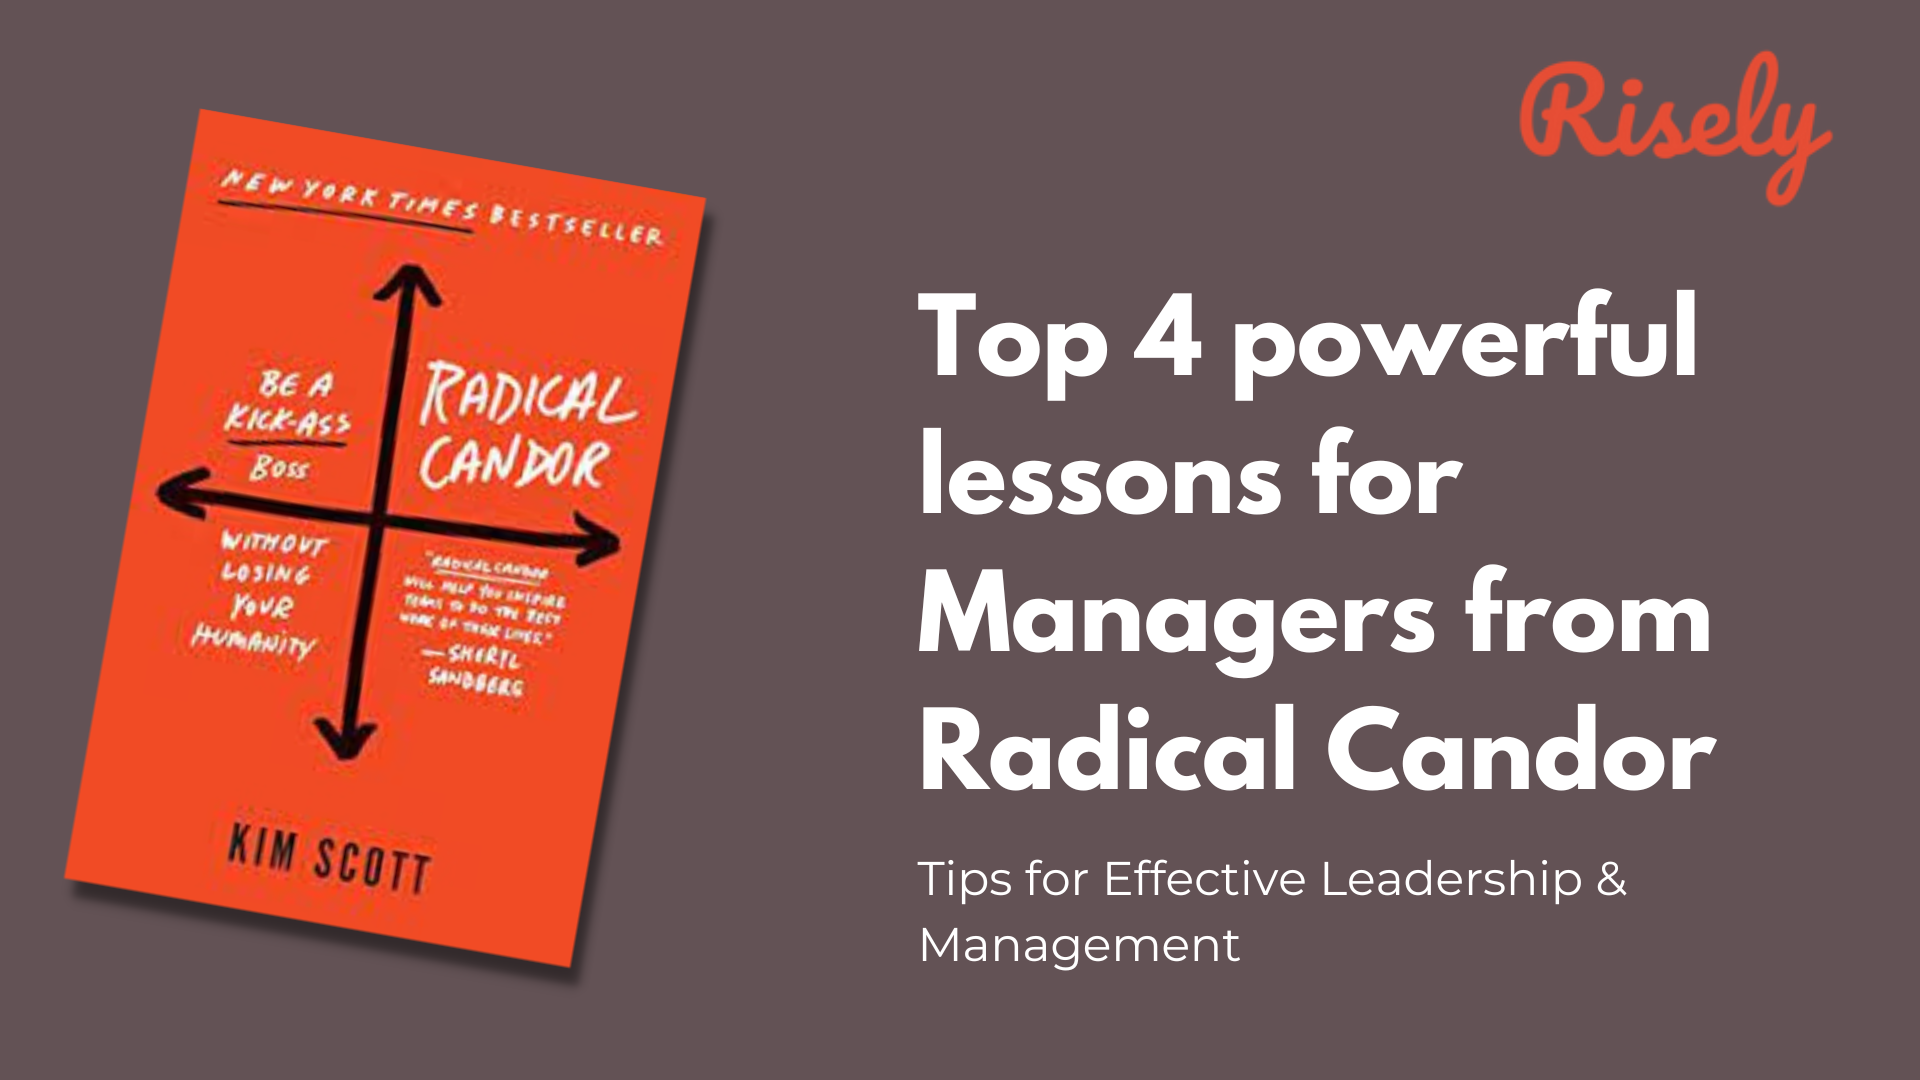 Top 4 powerful lessons for Managers from Radical Candor